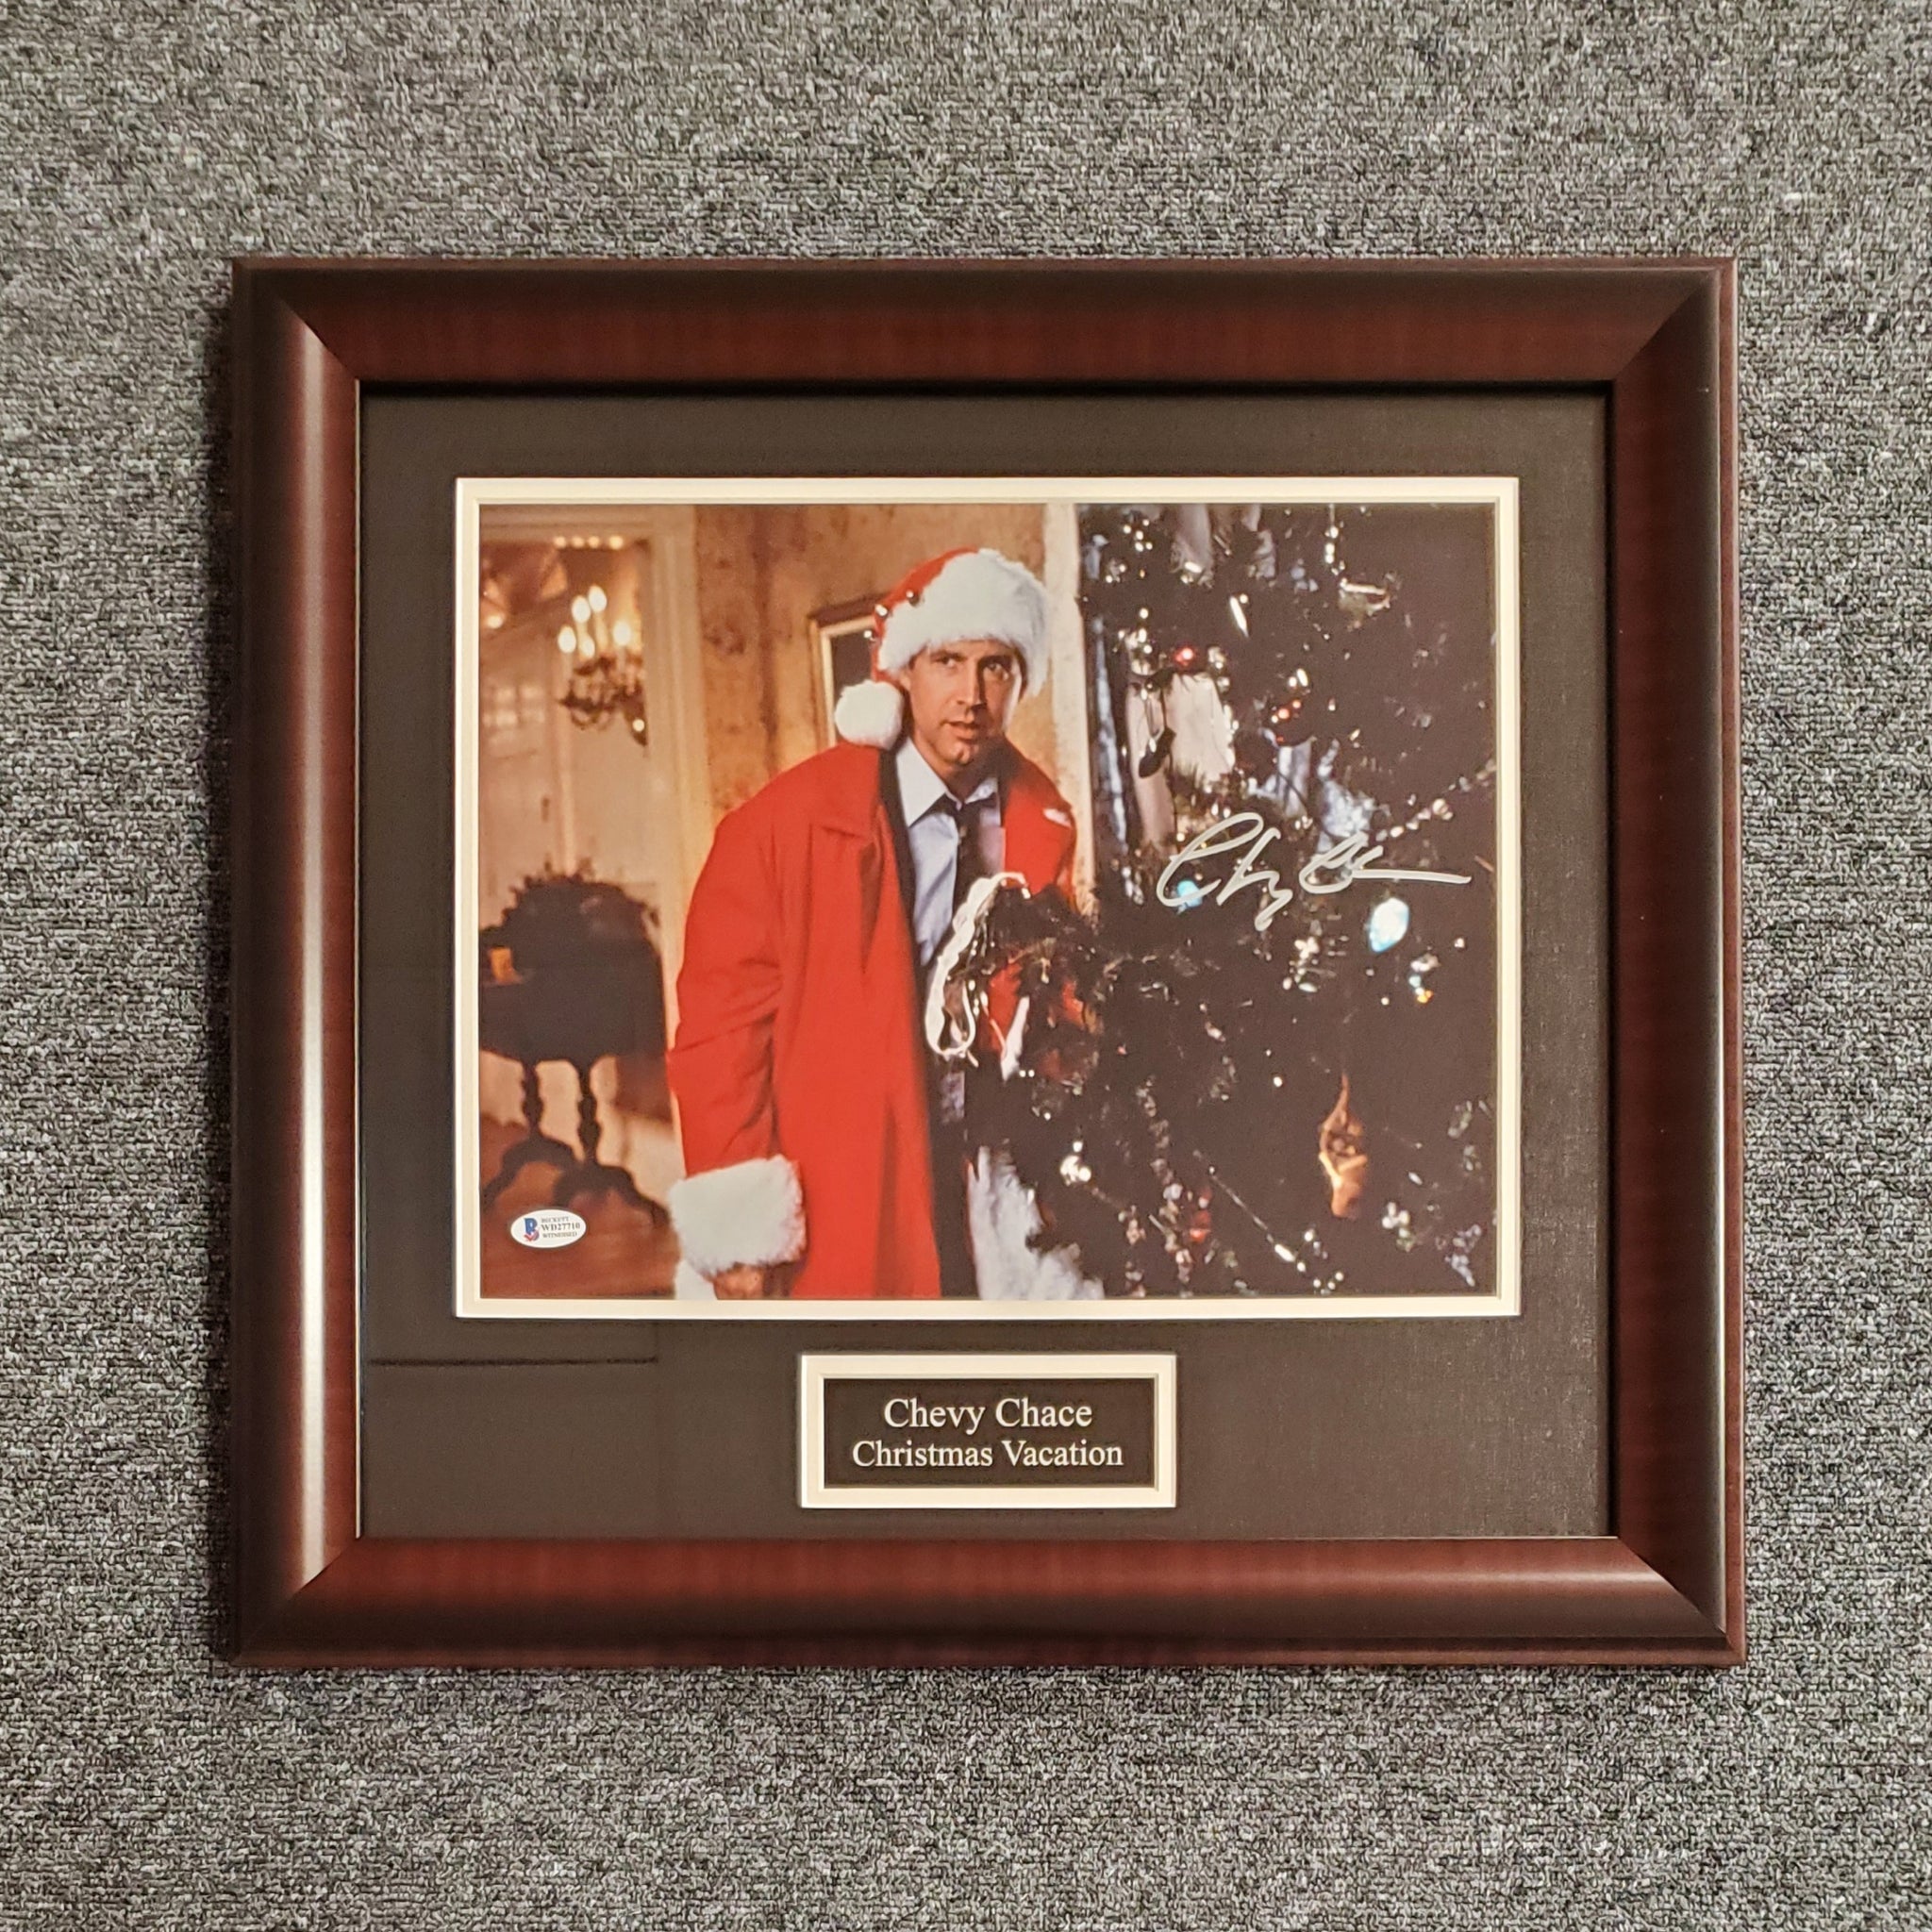 Chevy Chase "Christmas Vacation" Signed 11x14